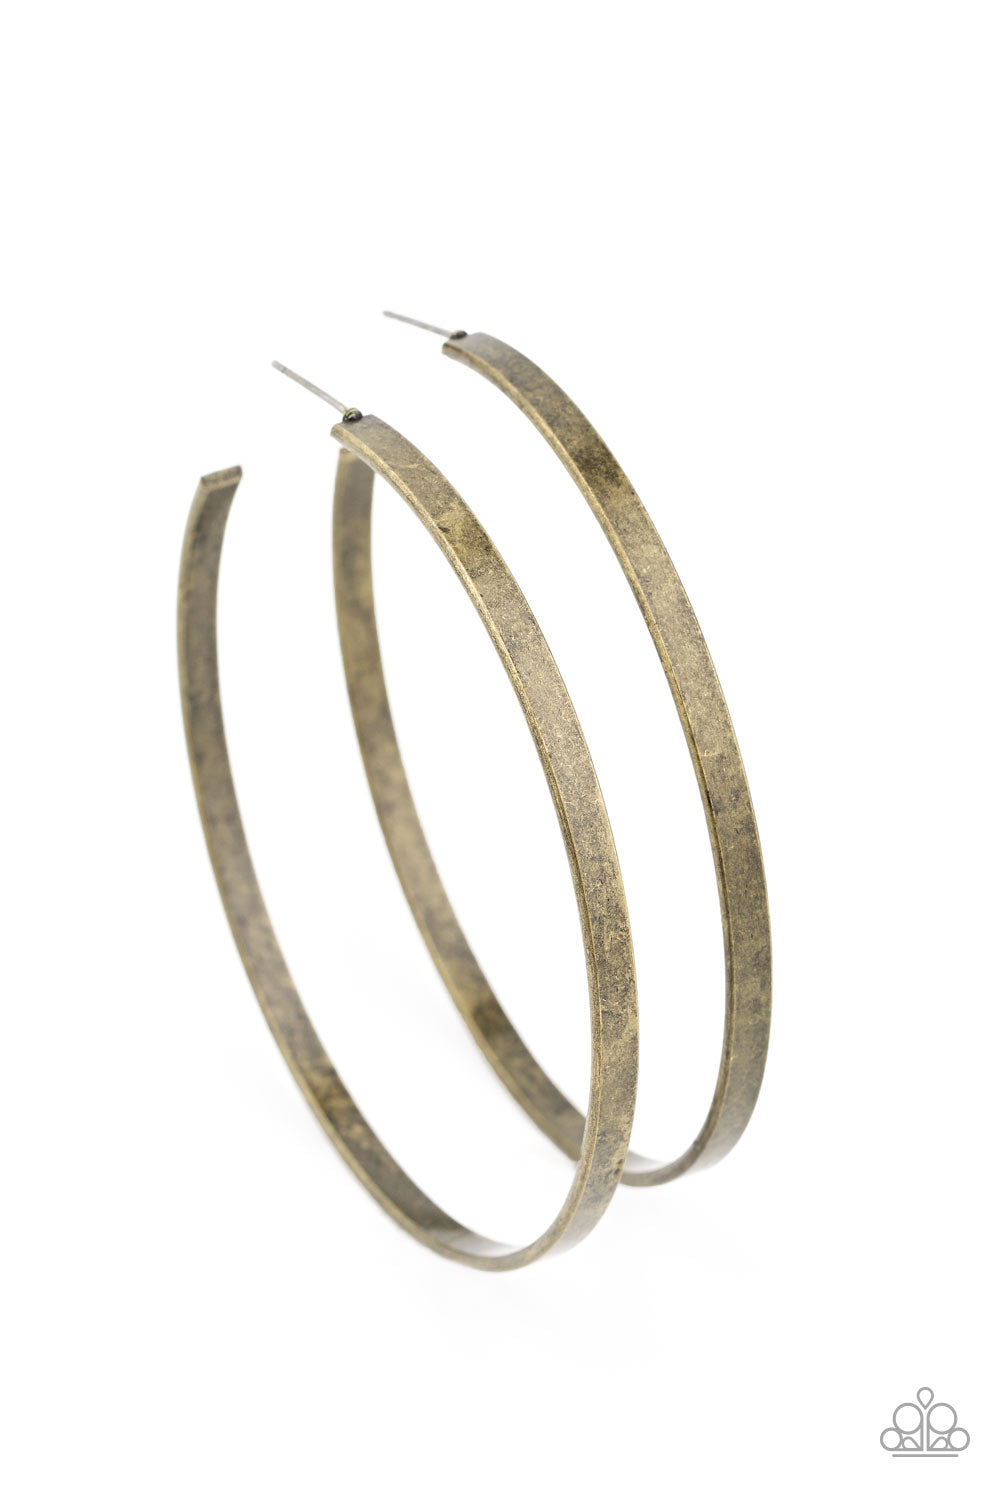 Paparazzi Lean Into The Curves Brass Post Hoop Earrings